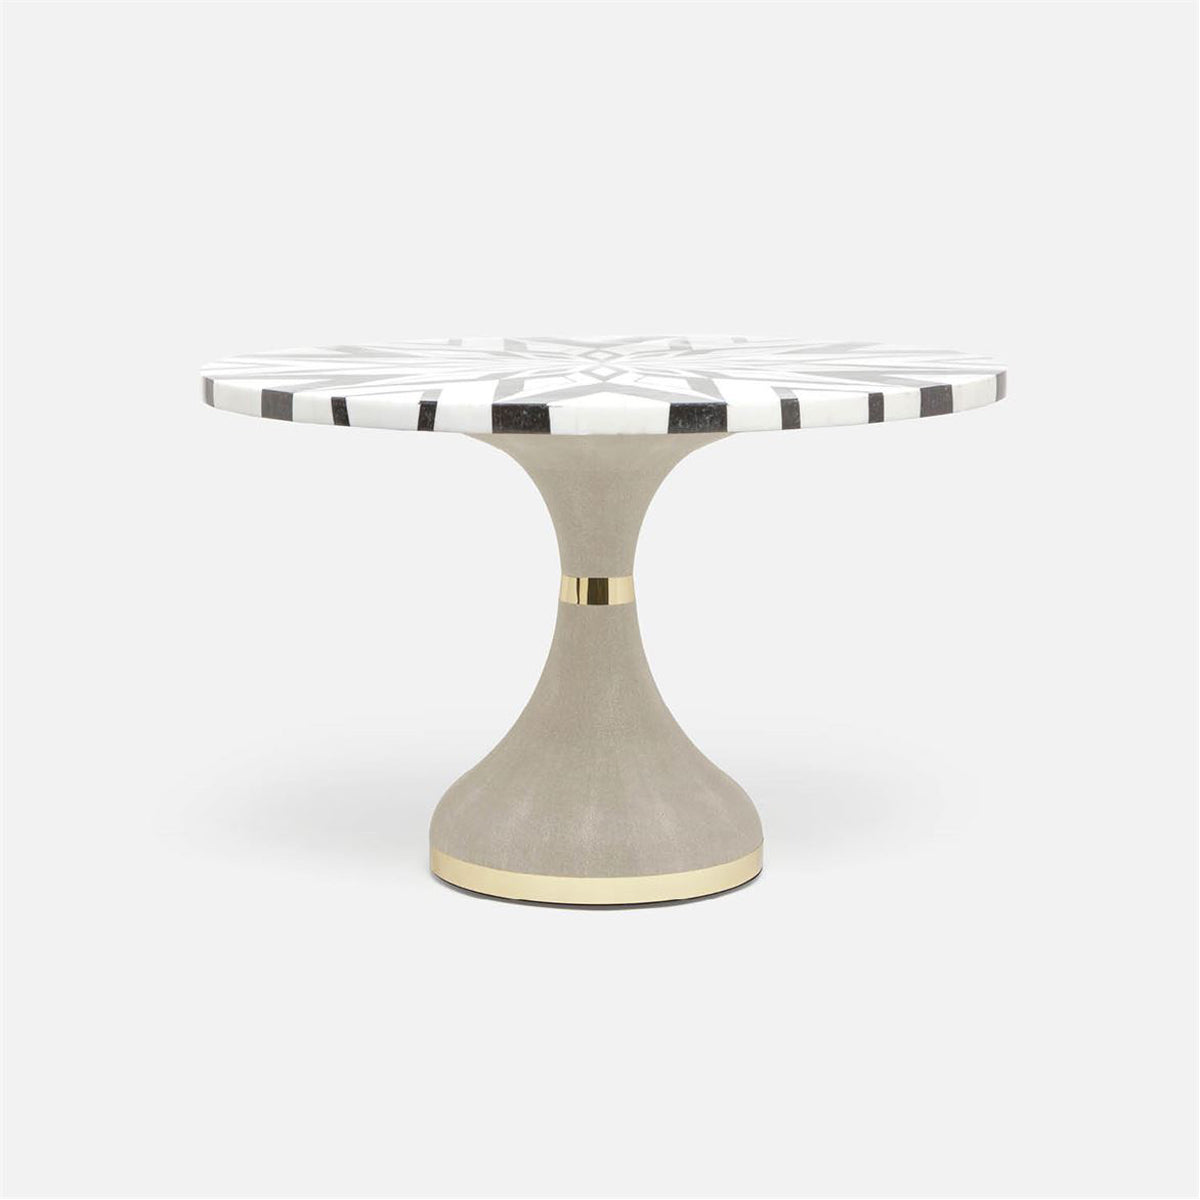 Made Goods Elis Dining Table in Black/White Striped Marble